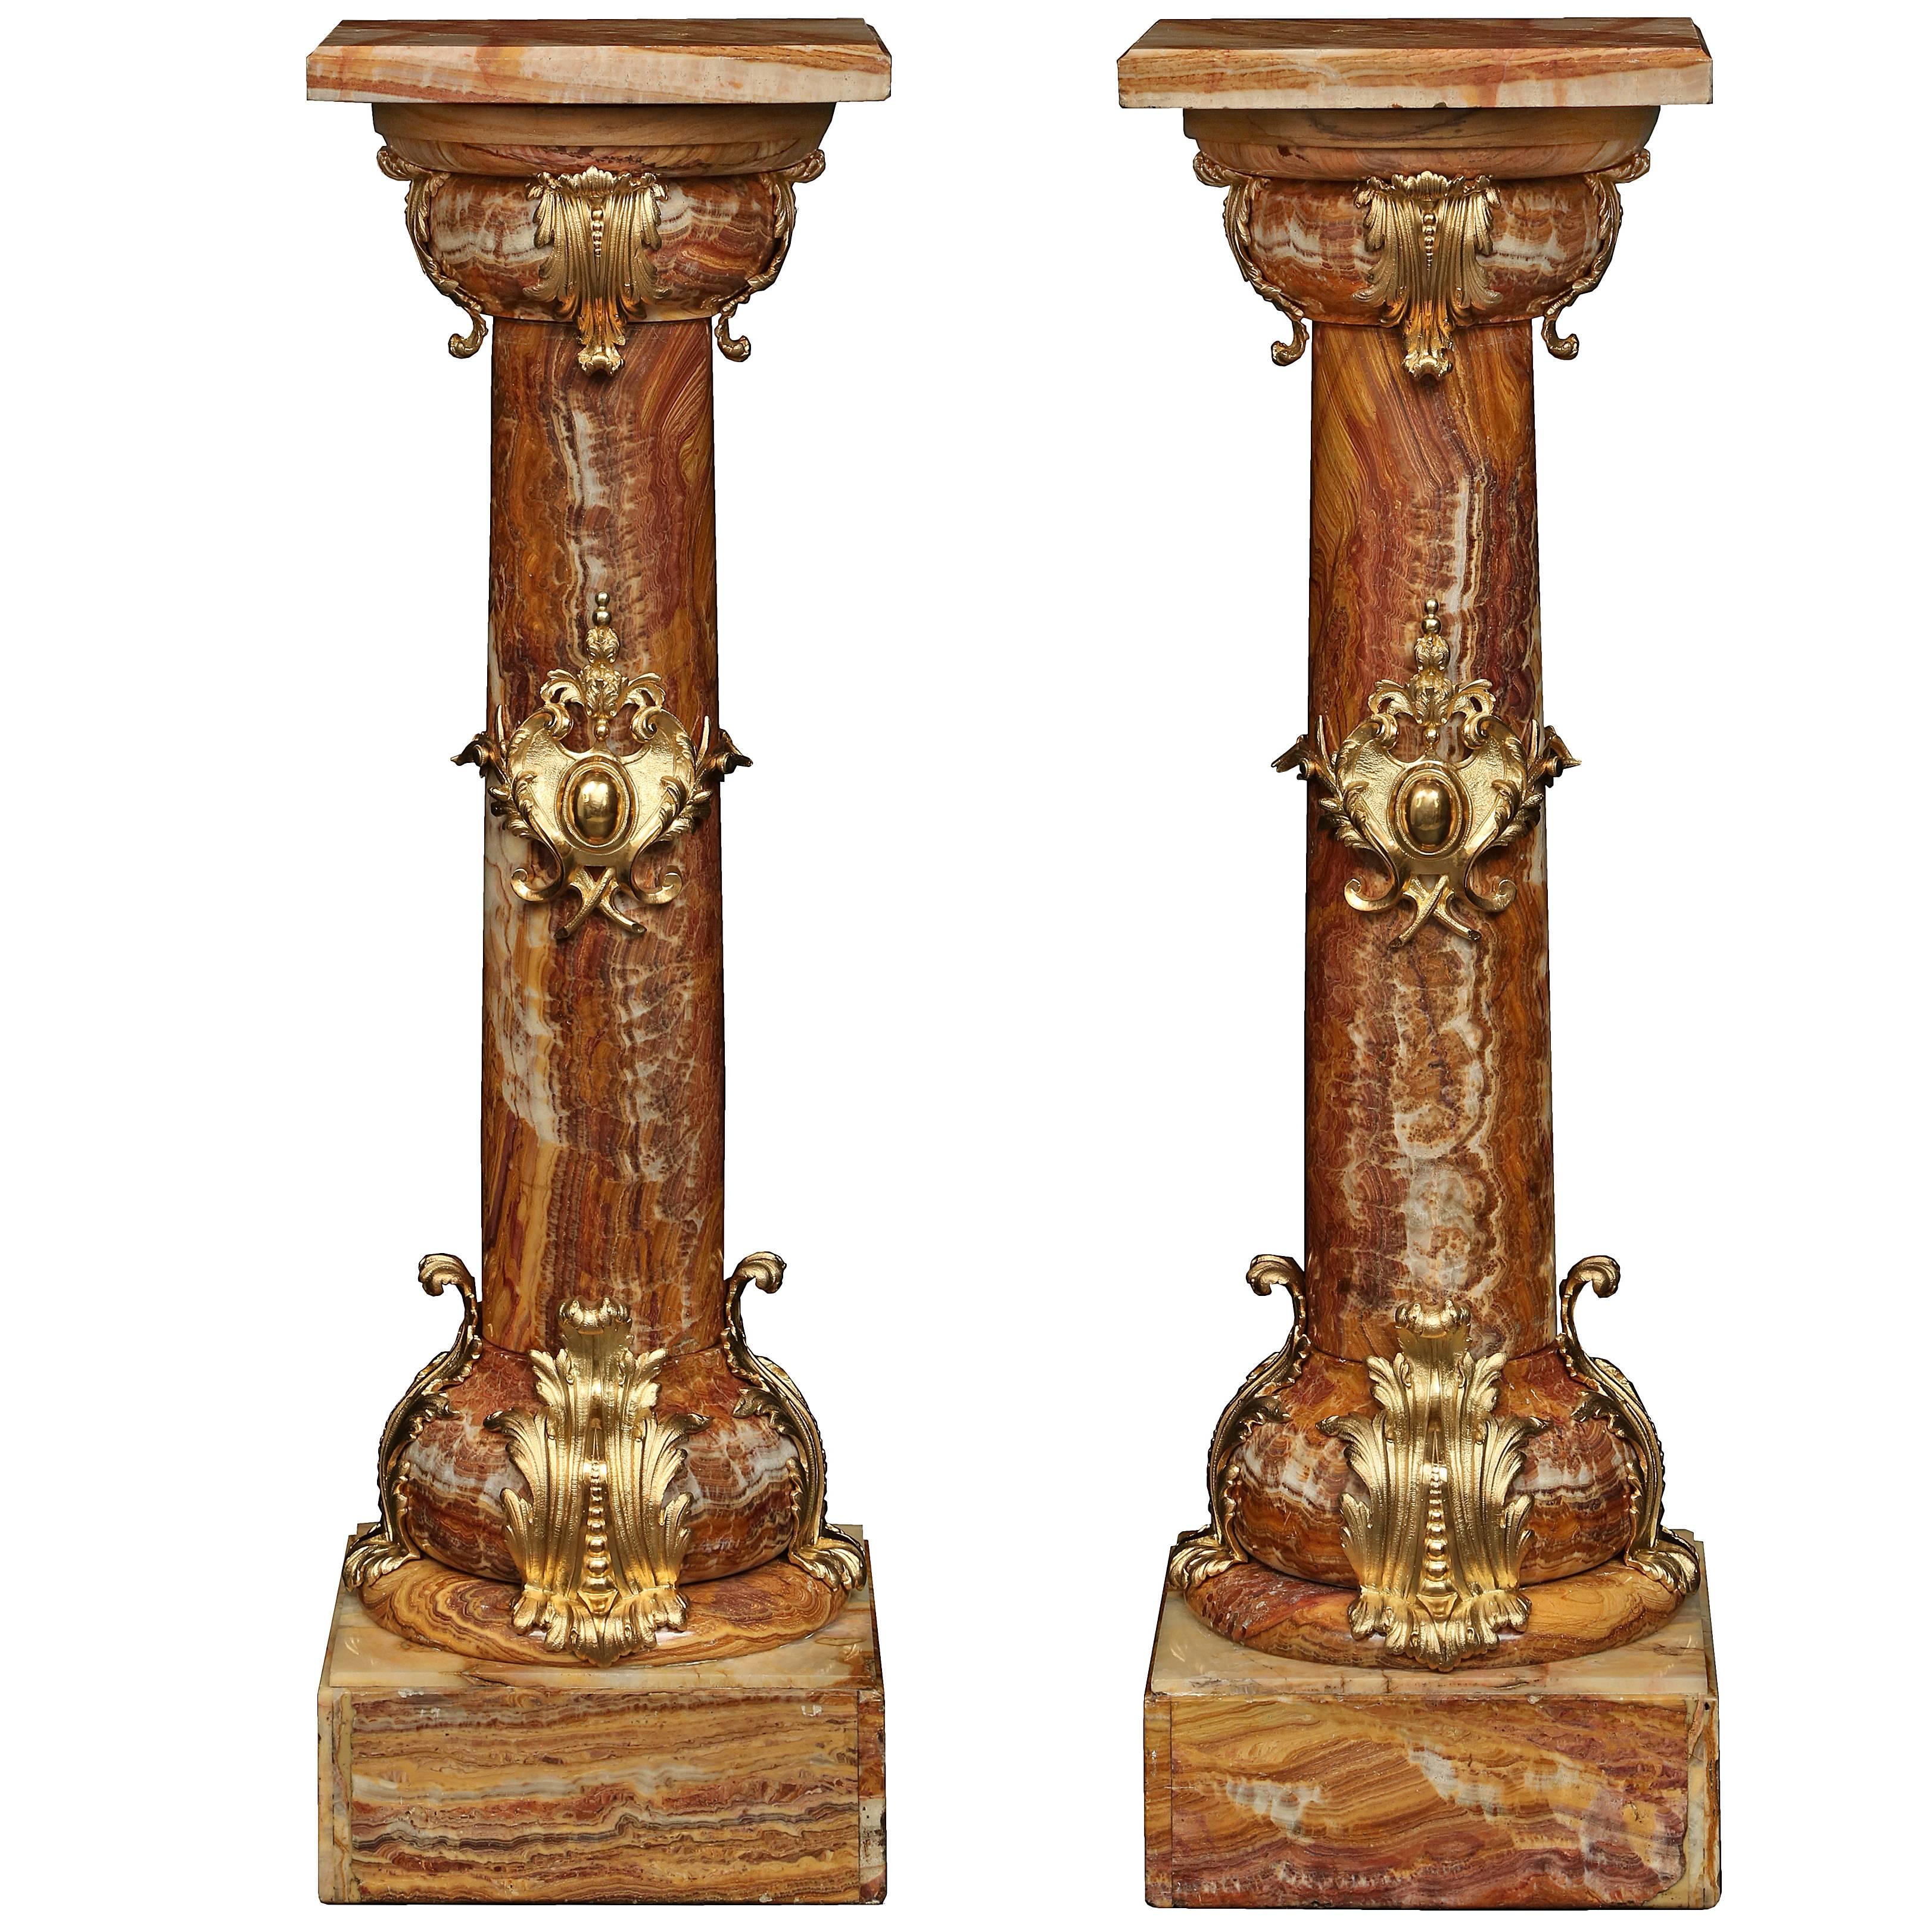 French 19th Century Belle Époque Period Onyx and Ormolu-Mounted Pedestals